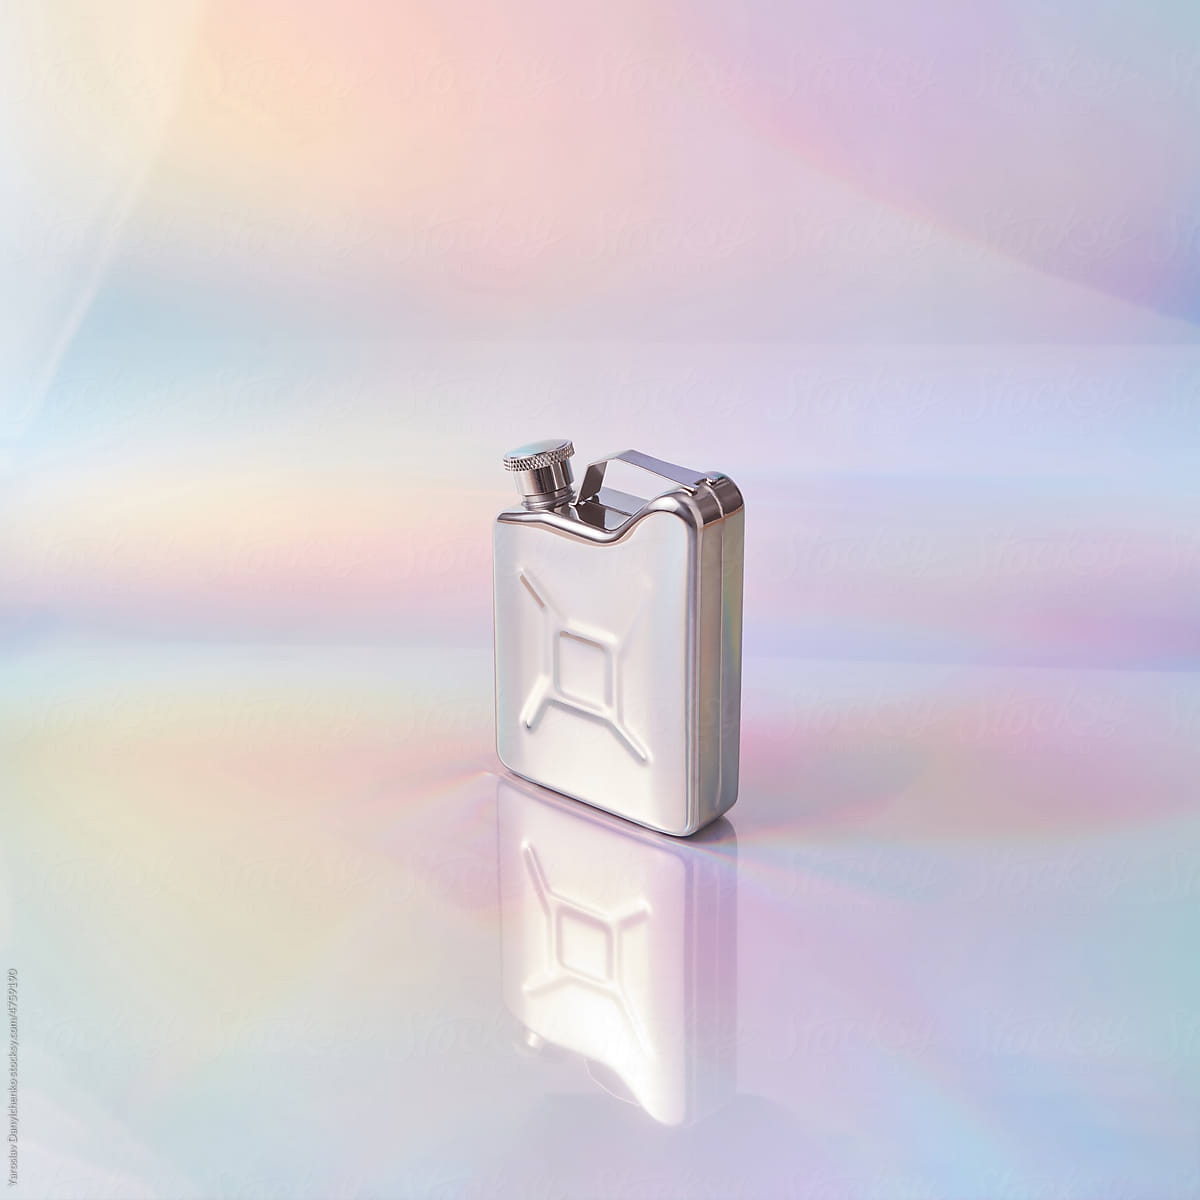 Steel canister over glossy background.